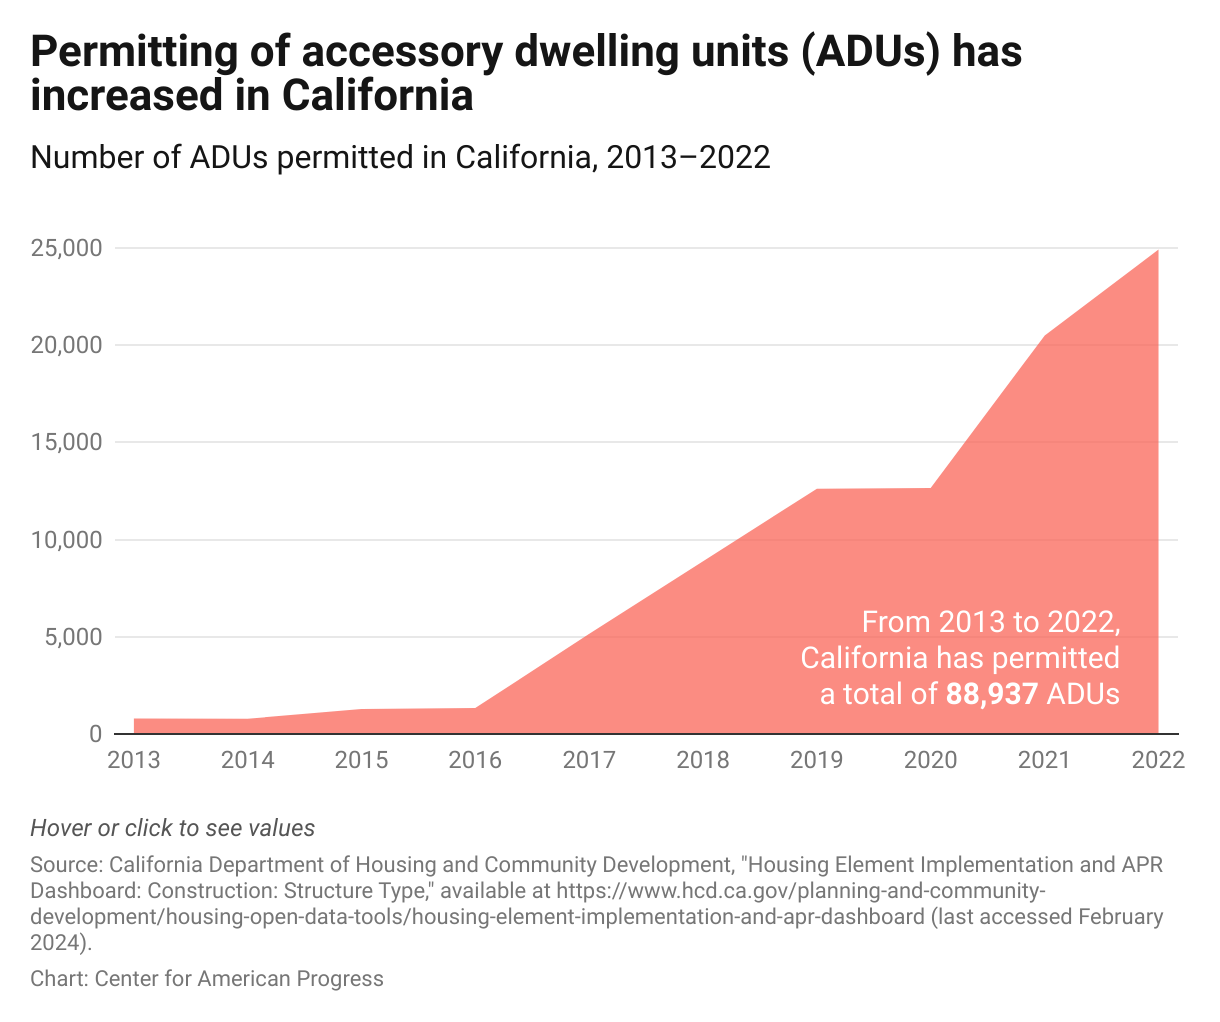 Alt text: The number of ADUs receiving permits has increased significantly since 2013.